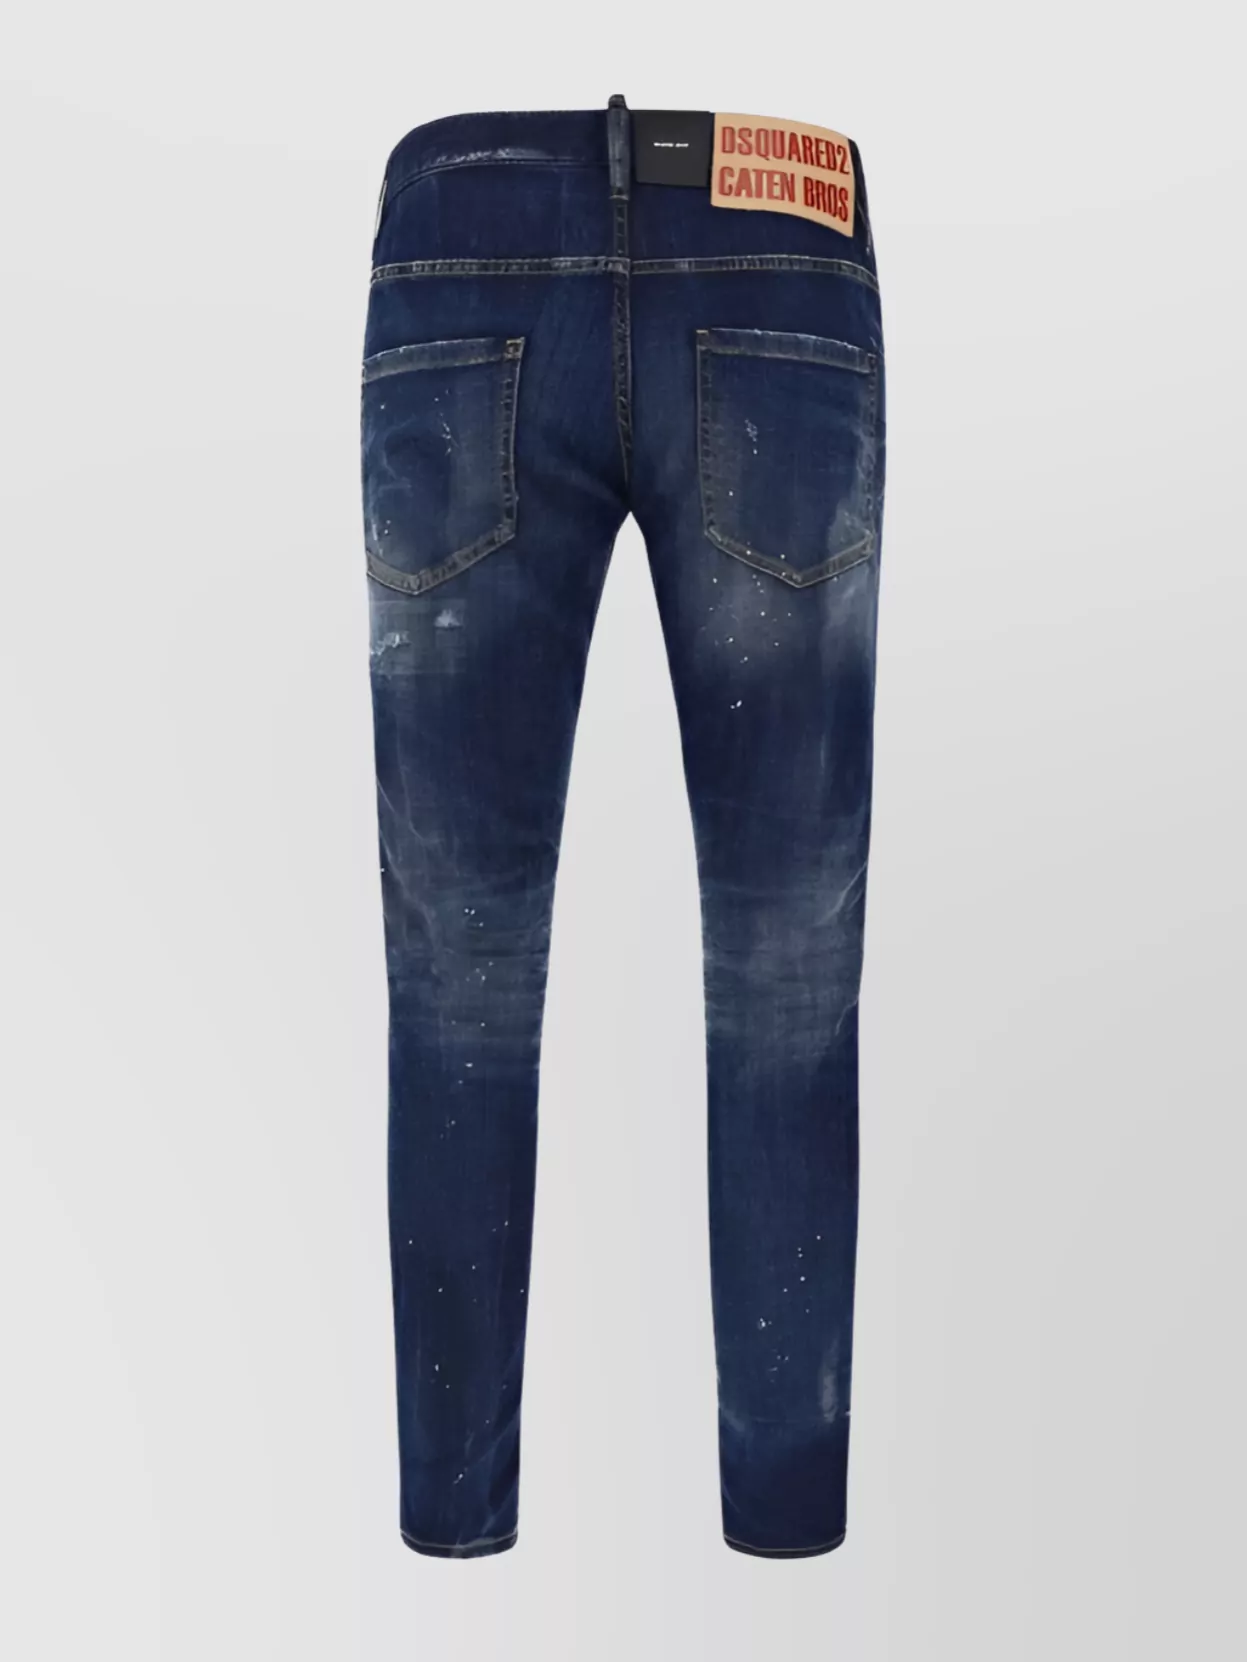 Shop Dsquared2 Distressed Cotton Jeans With Patent Leather Accents